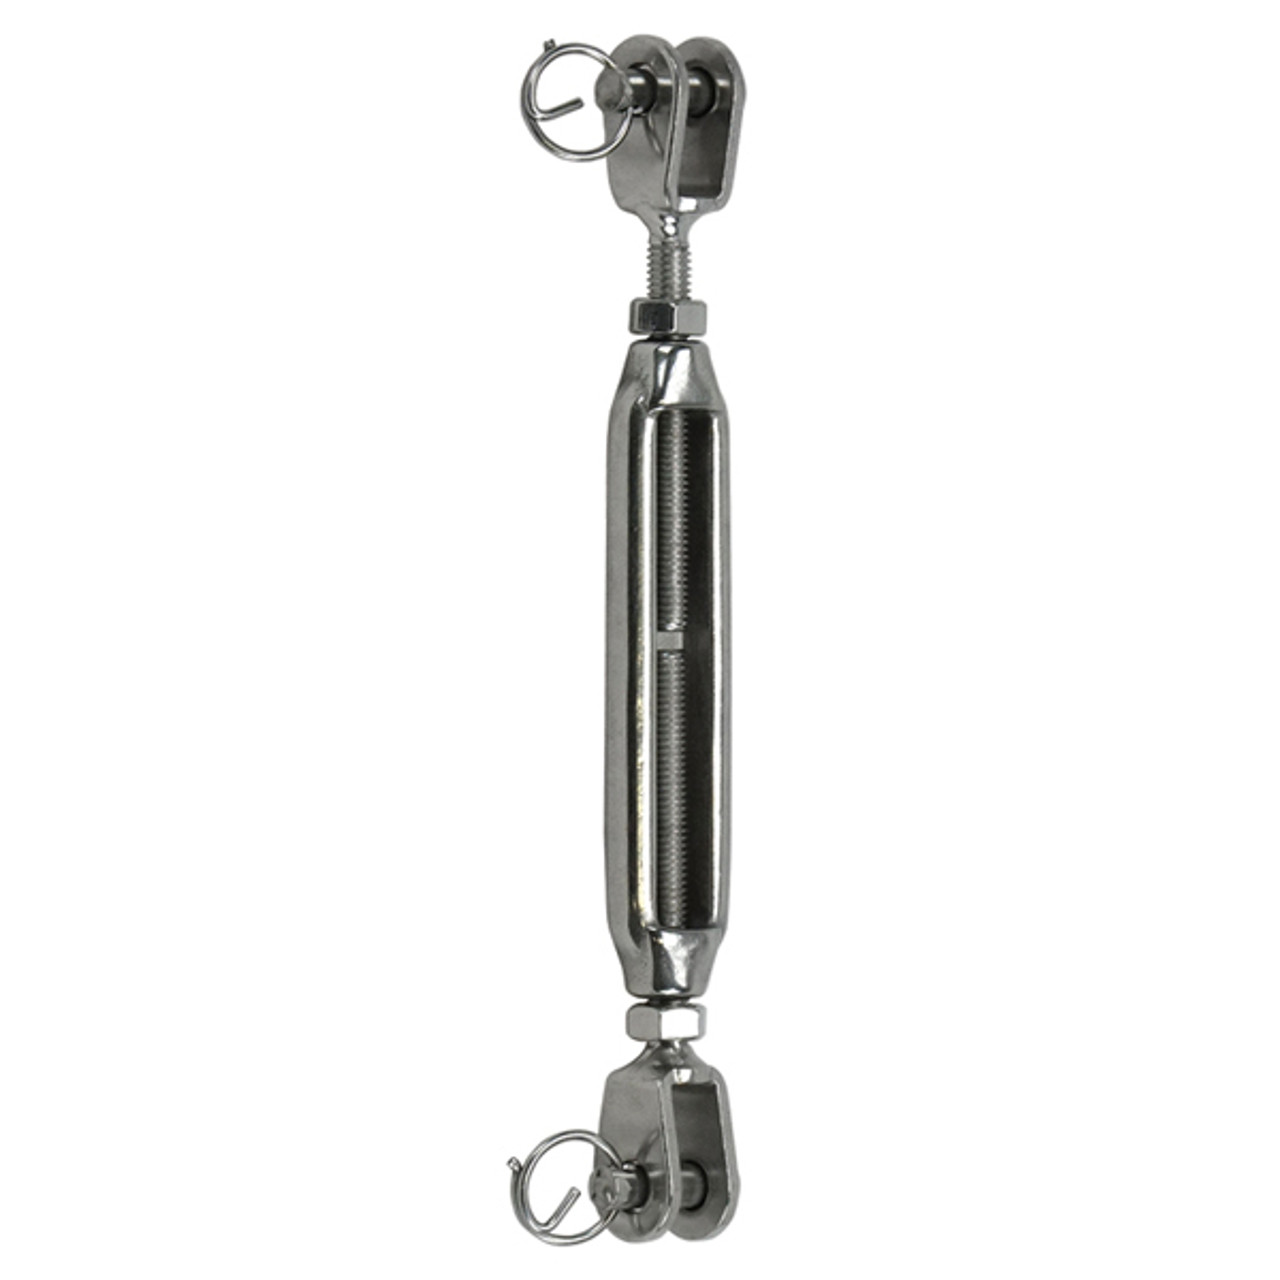 Stainless Steel Turnbuckles - Jaw & Jaw - 316 Grade